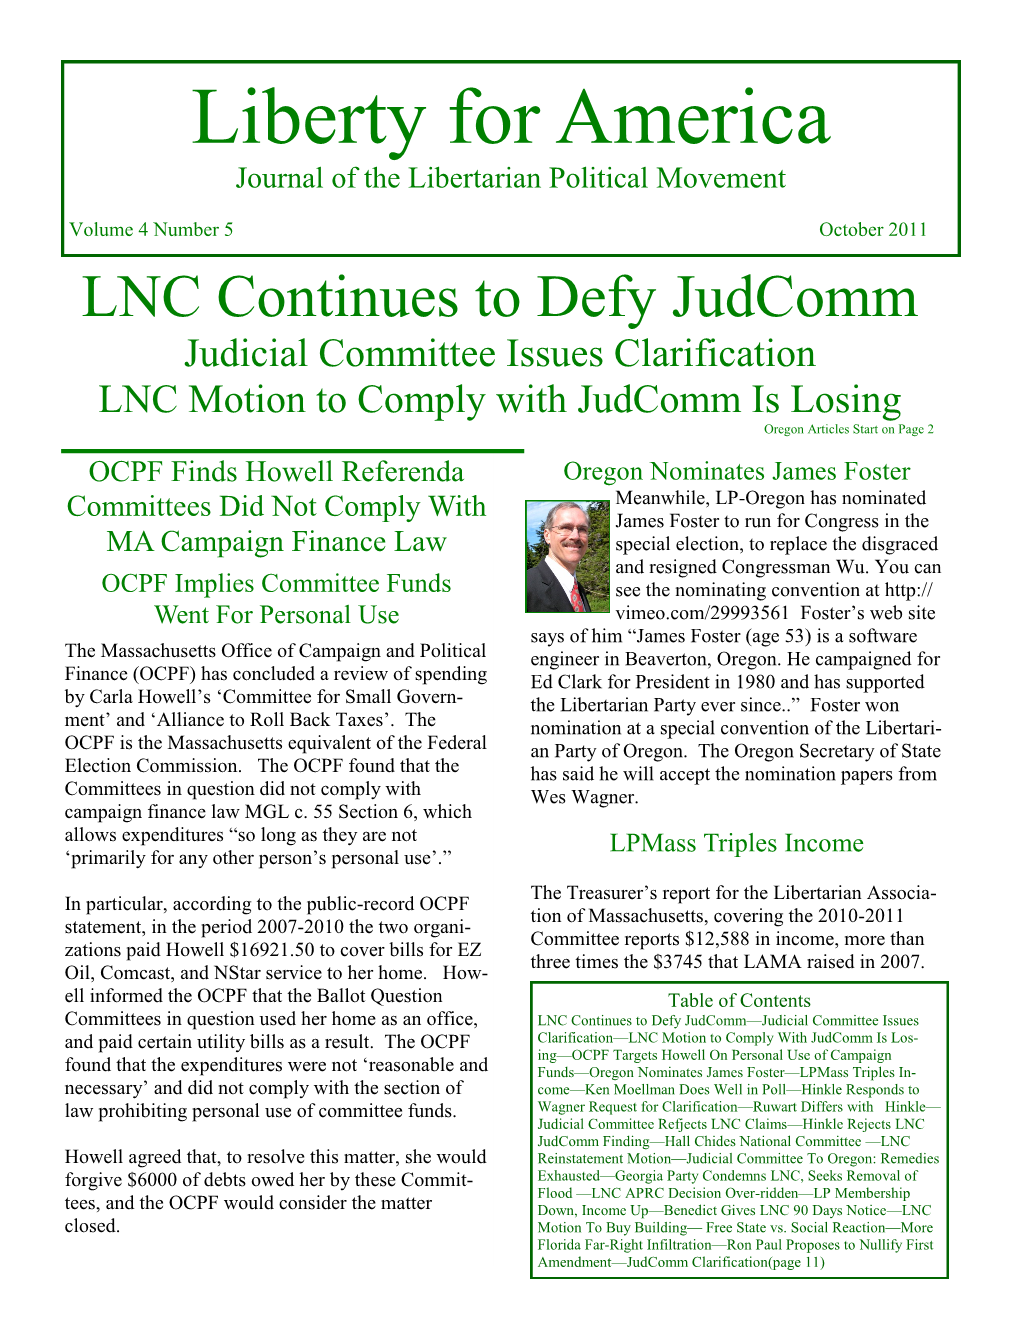 October 2011 LNC Continues to Defy Judcomm Judicial Committee Issues Clarification